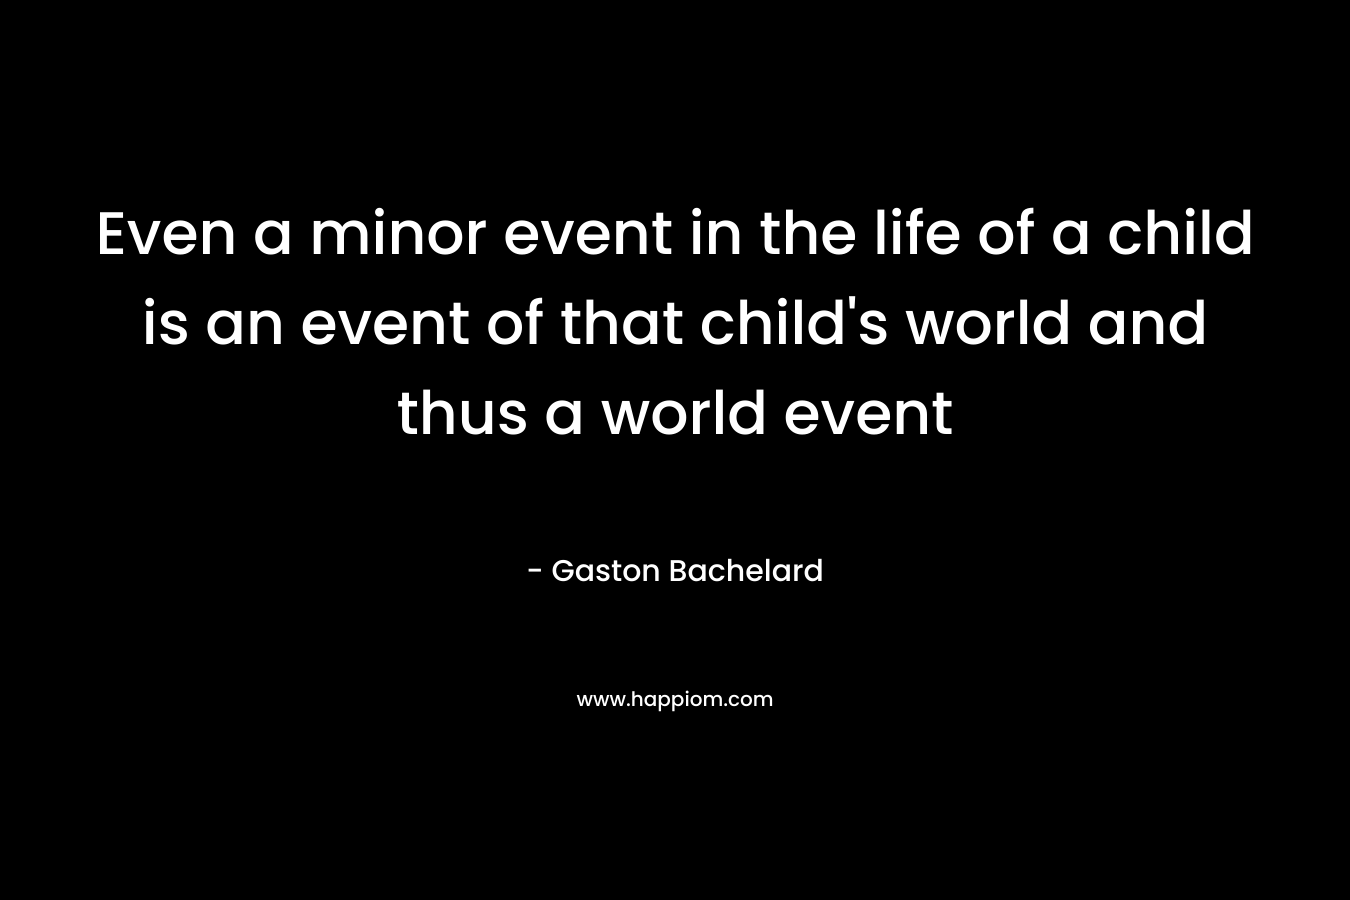 Even a minor event in the life of a child is an event of that child's world and thus a world event